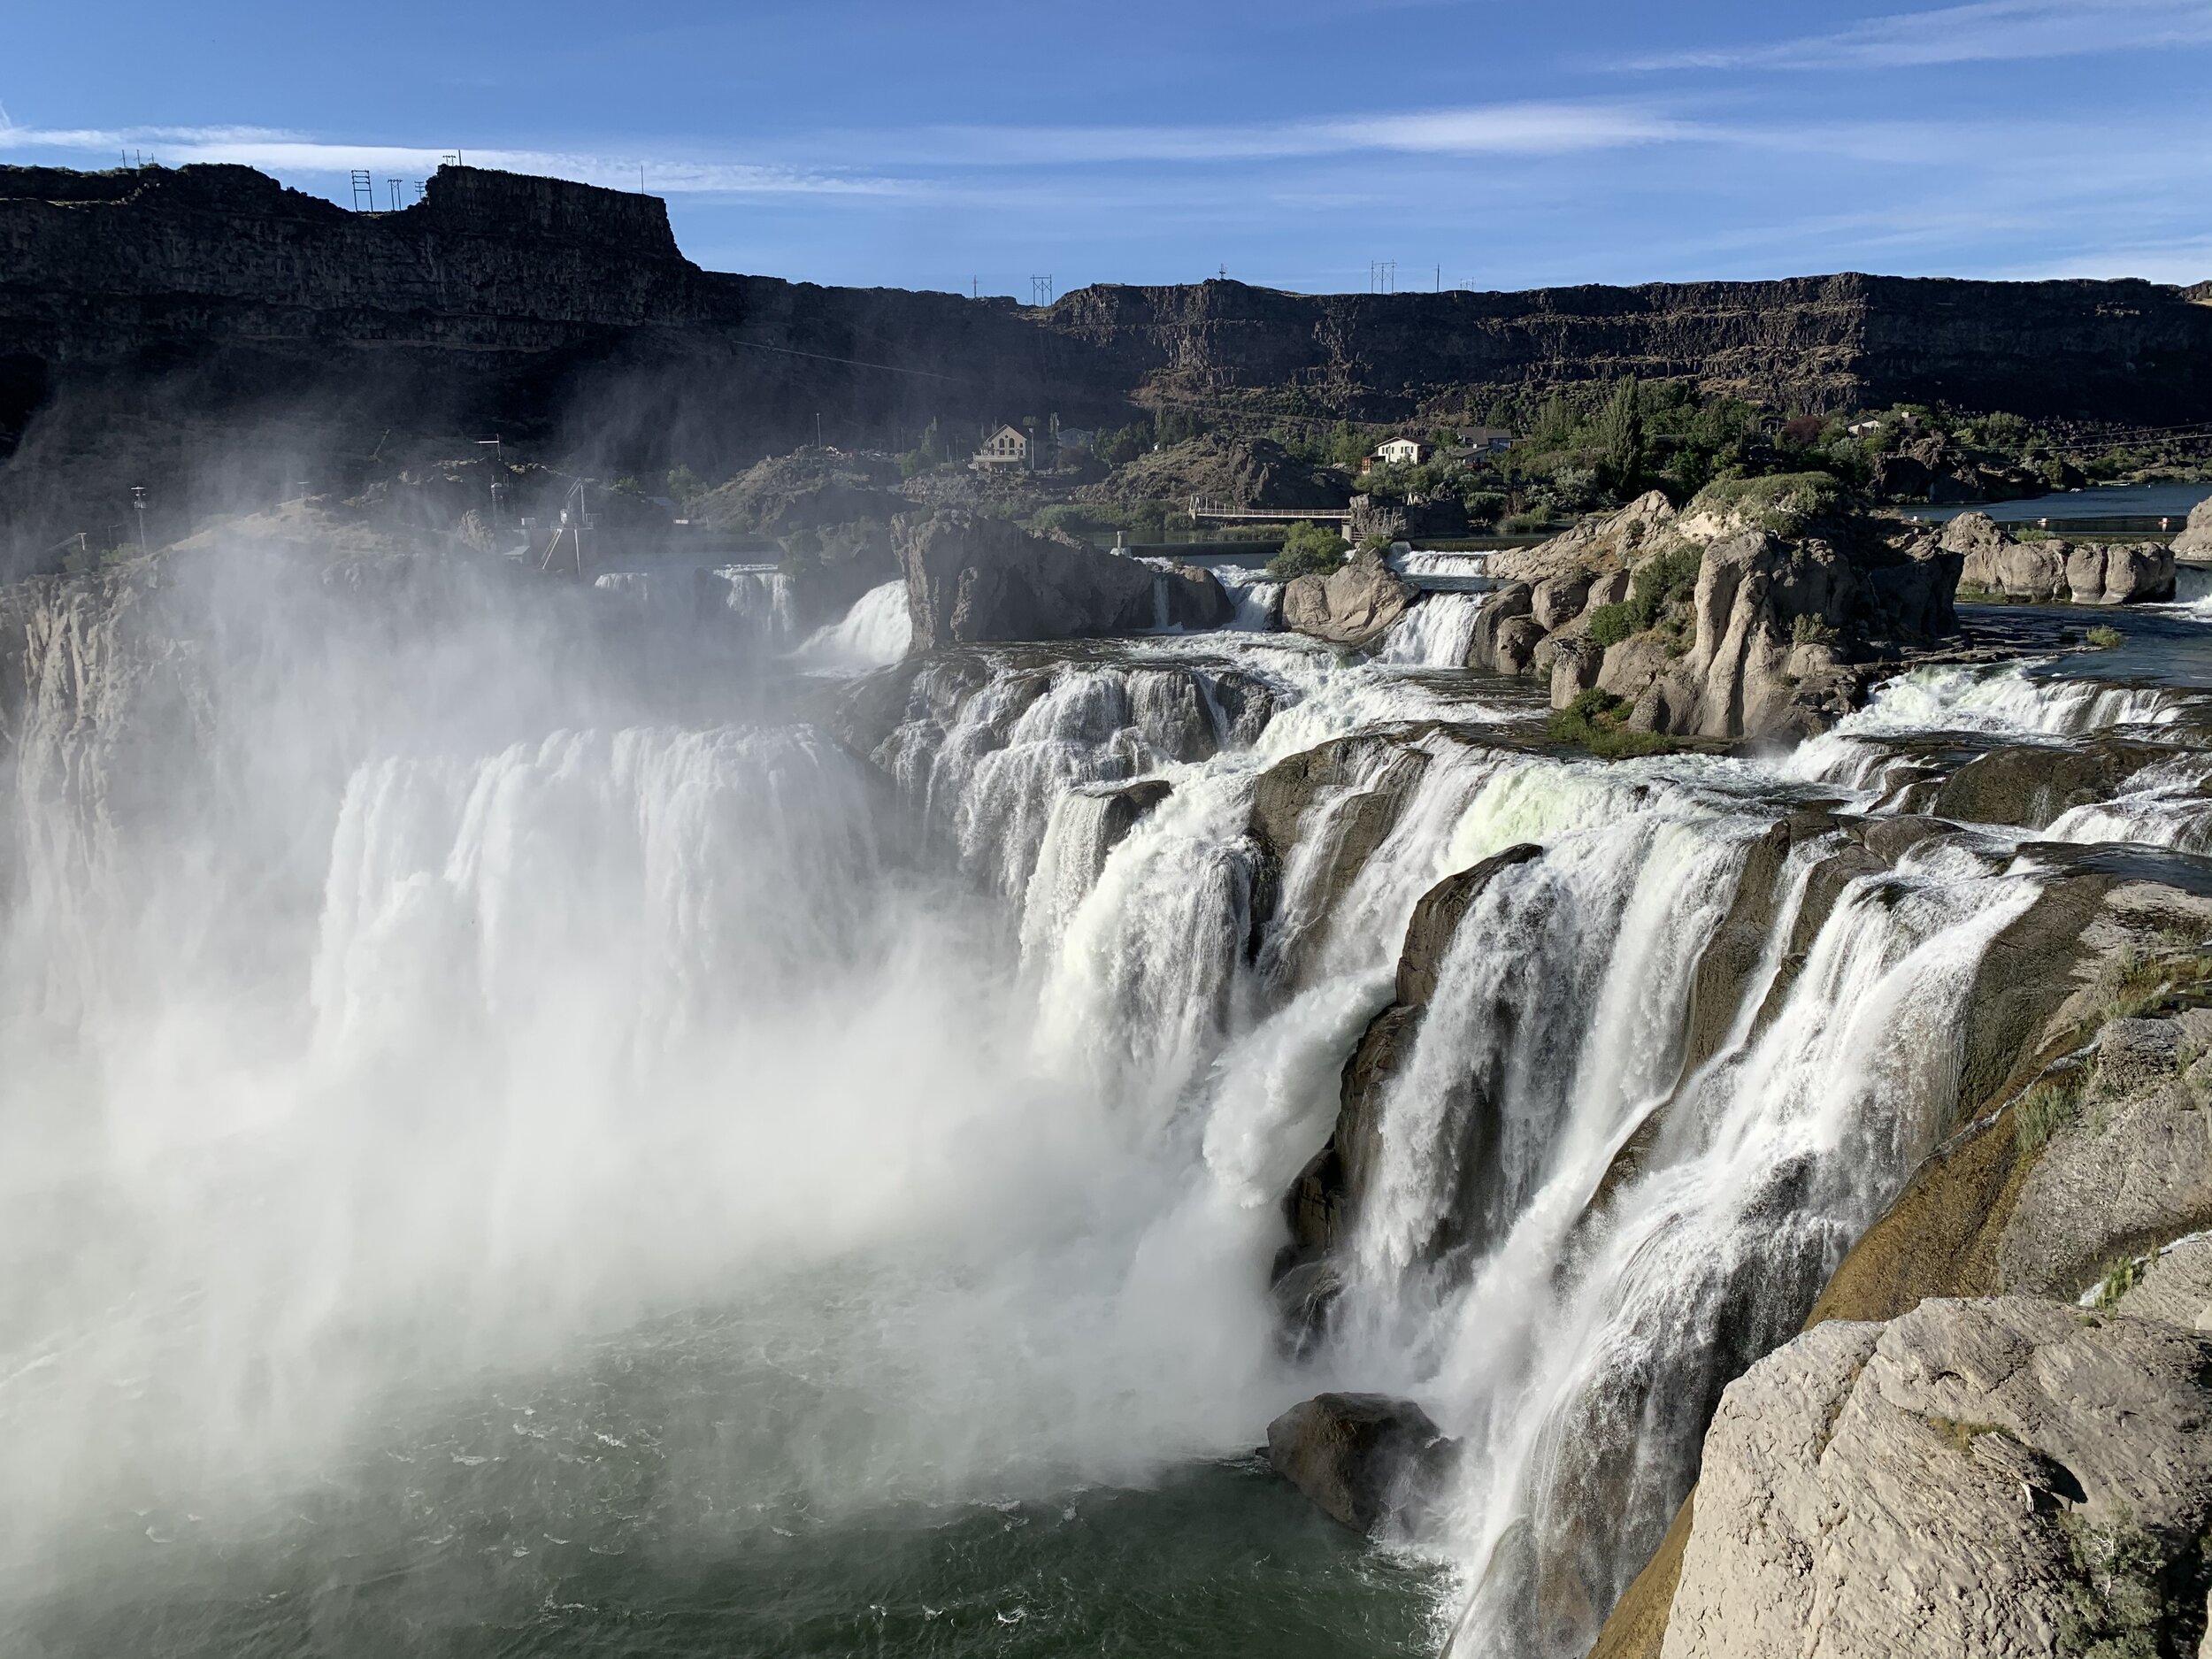  Immediately after arriving in Twin Falls, Idaho, we discovered the  Niagara of the West,  as Shoshone Falls is sometimes called. The falls are 212 feet—45 feet taller than the true Niagara Falls, and are over 1000 feet wide.   